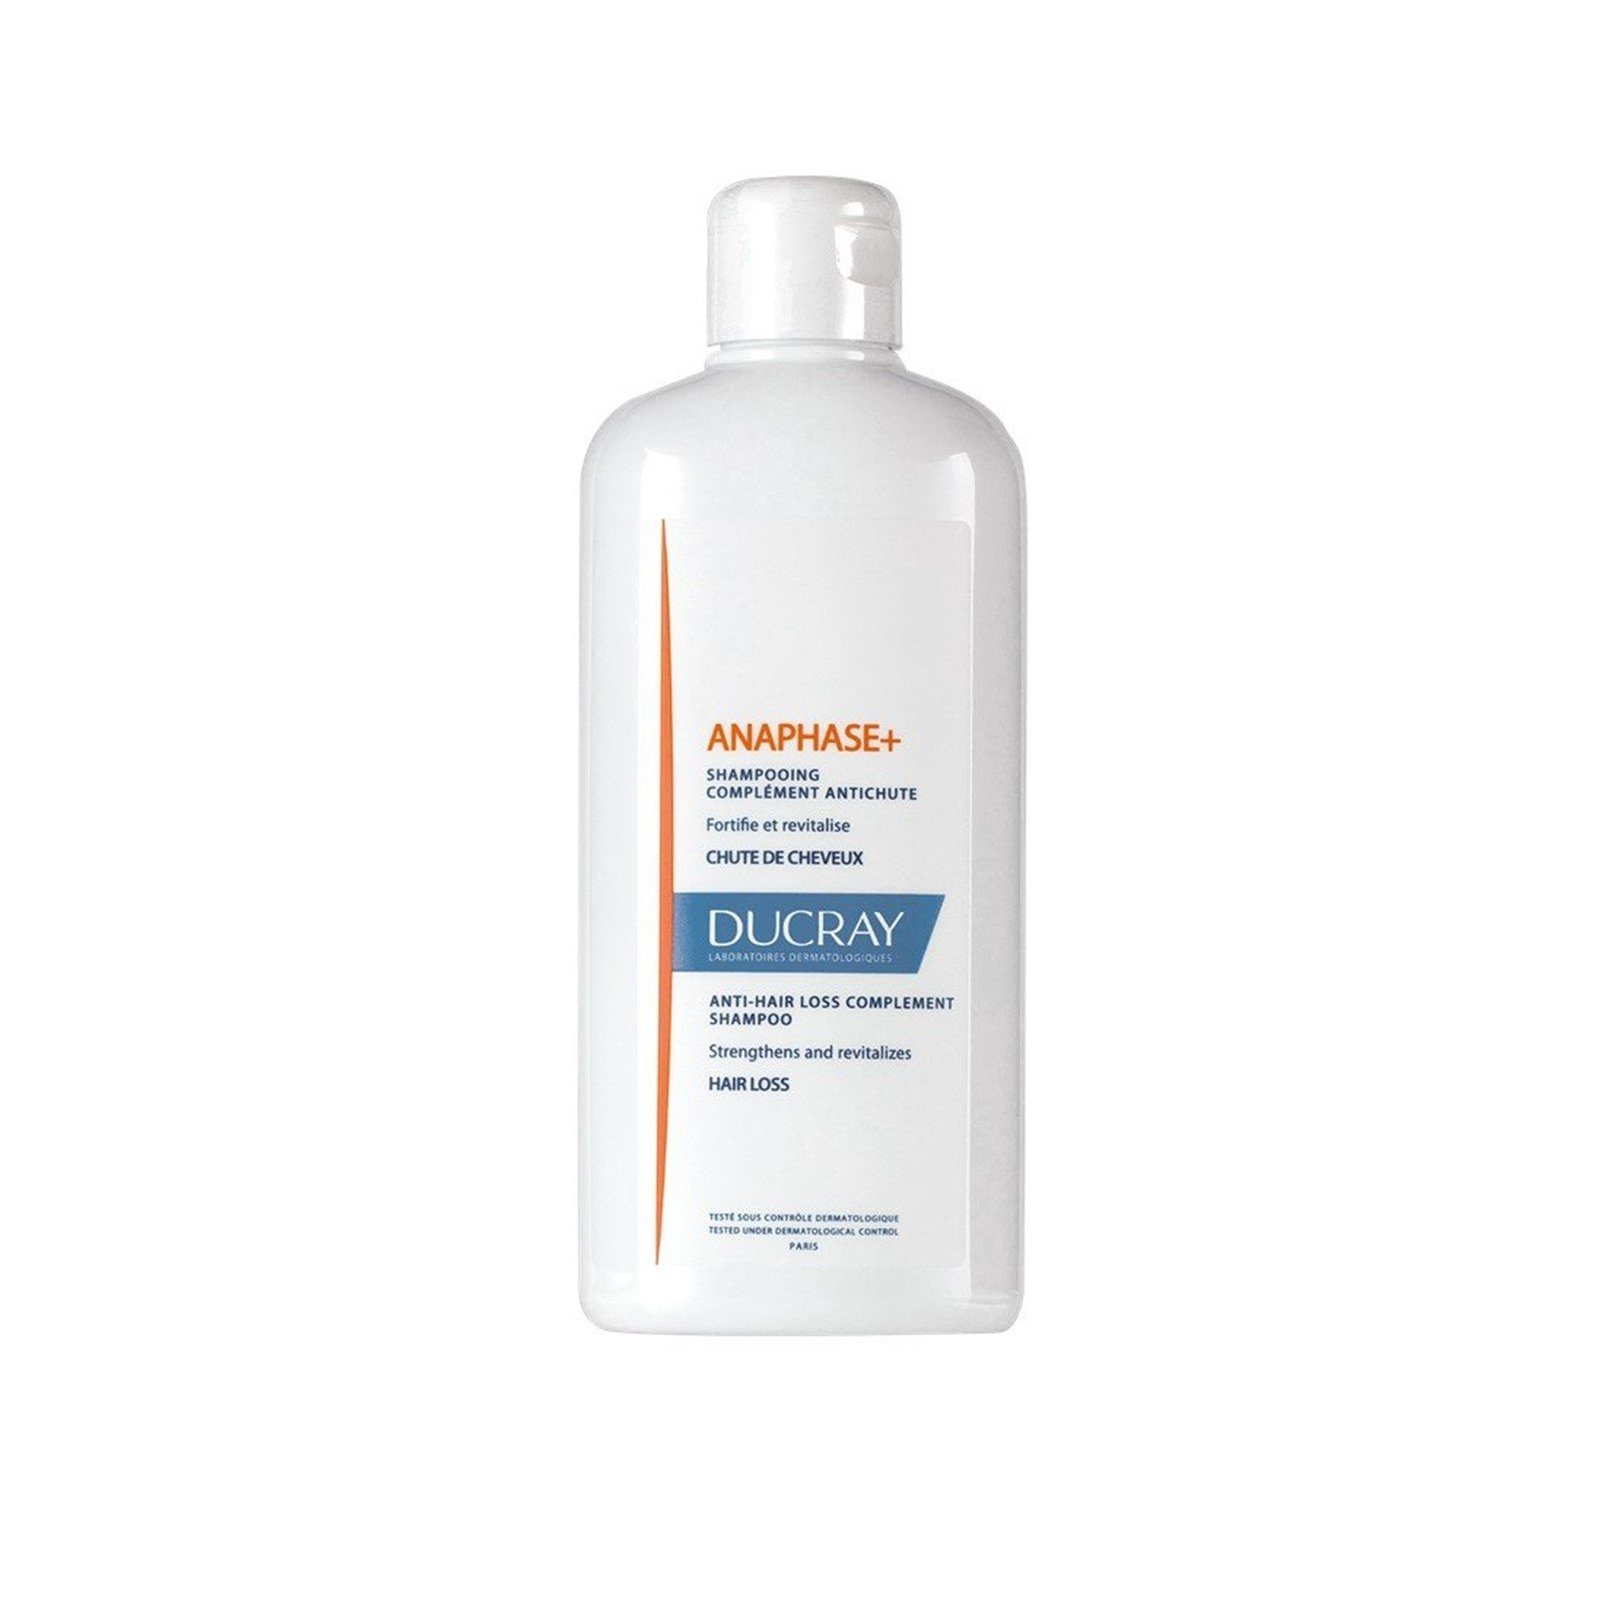 Ducray Anaphase+ Anti-Hair Loss Complement Shampoo 400ml